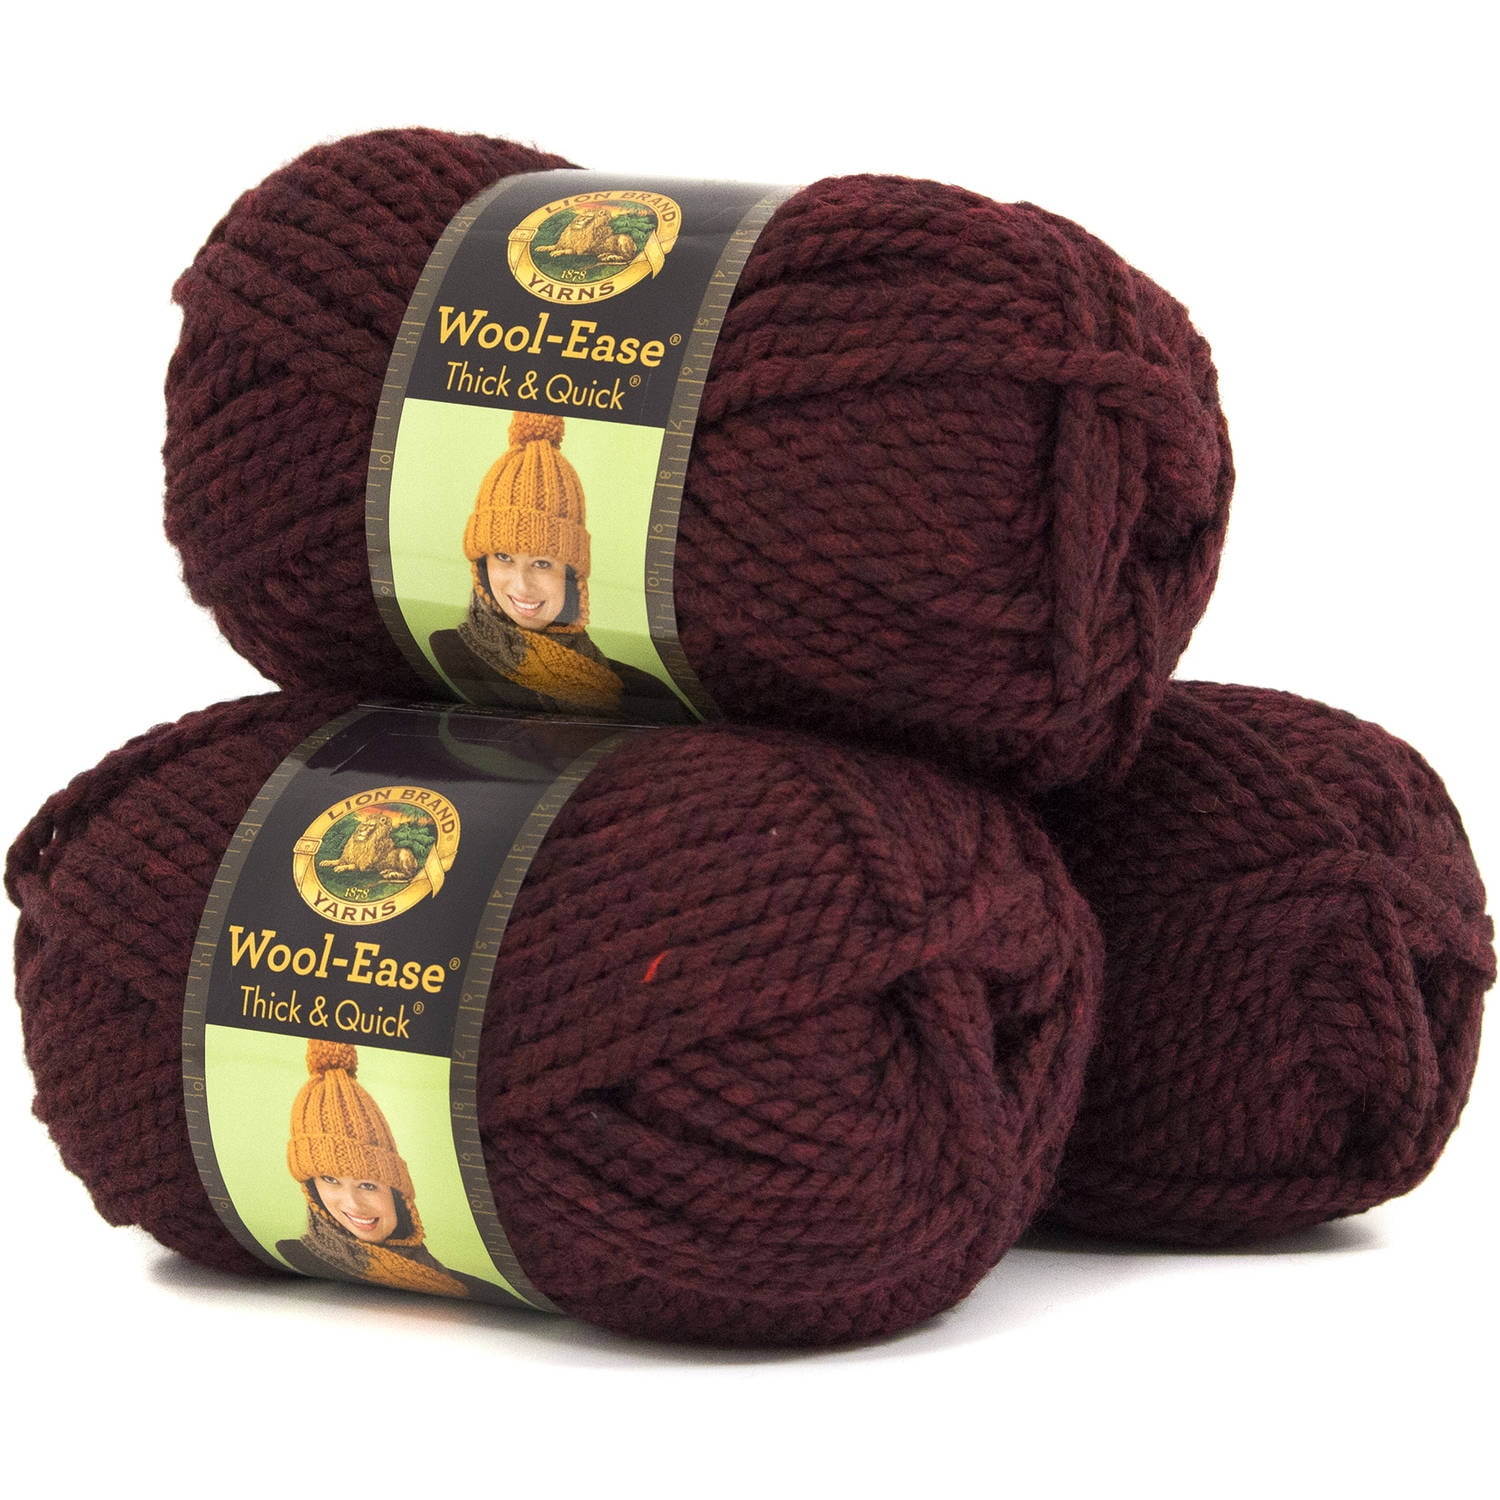 Lion Brand Yarn Wool-Ease Thick and Quick Claret Classic Super Bulky  Acrylic, Wool Red Yarn 3 Pack 